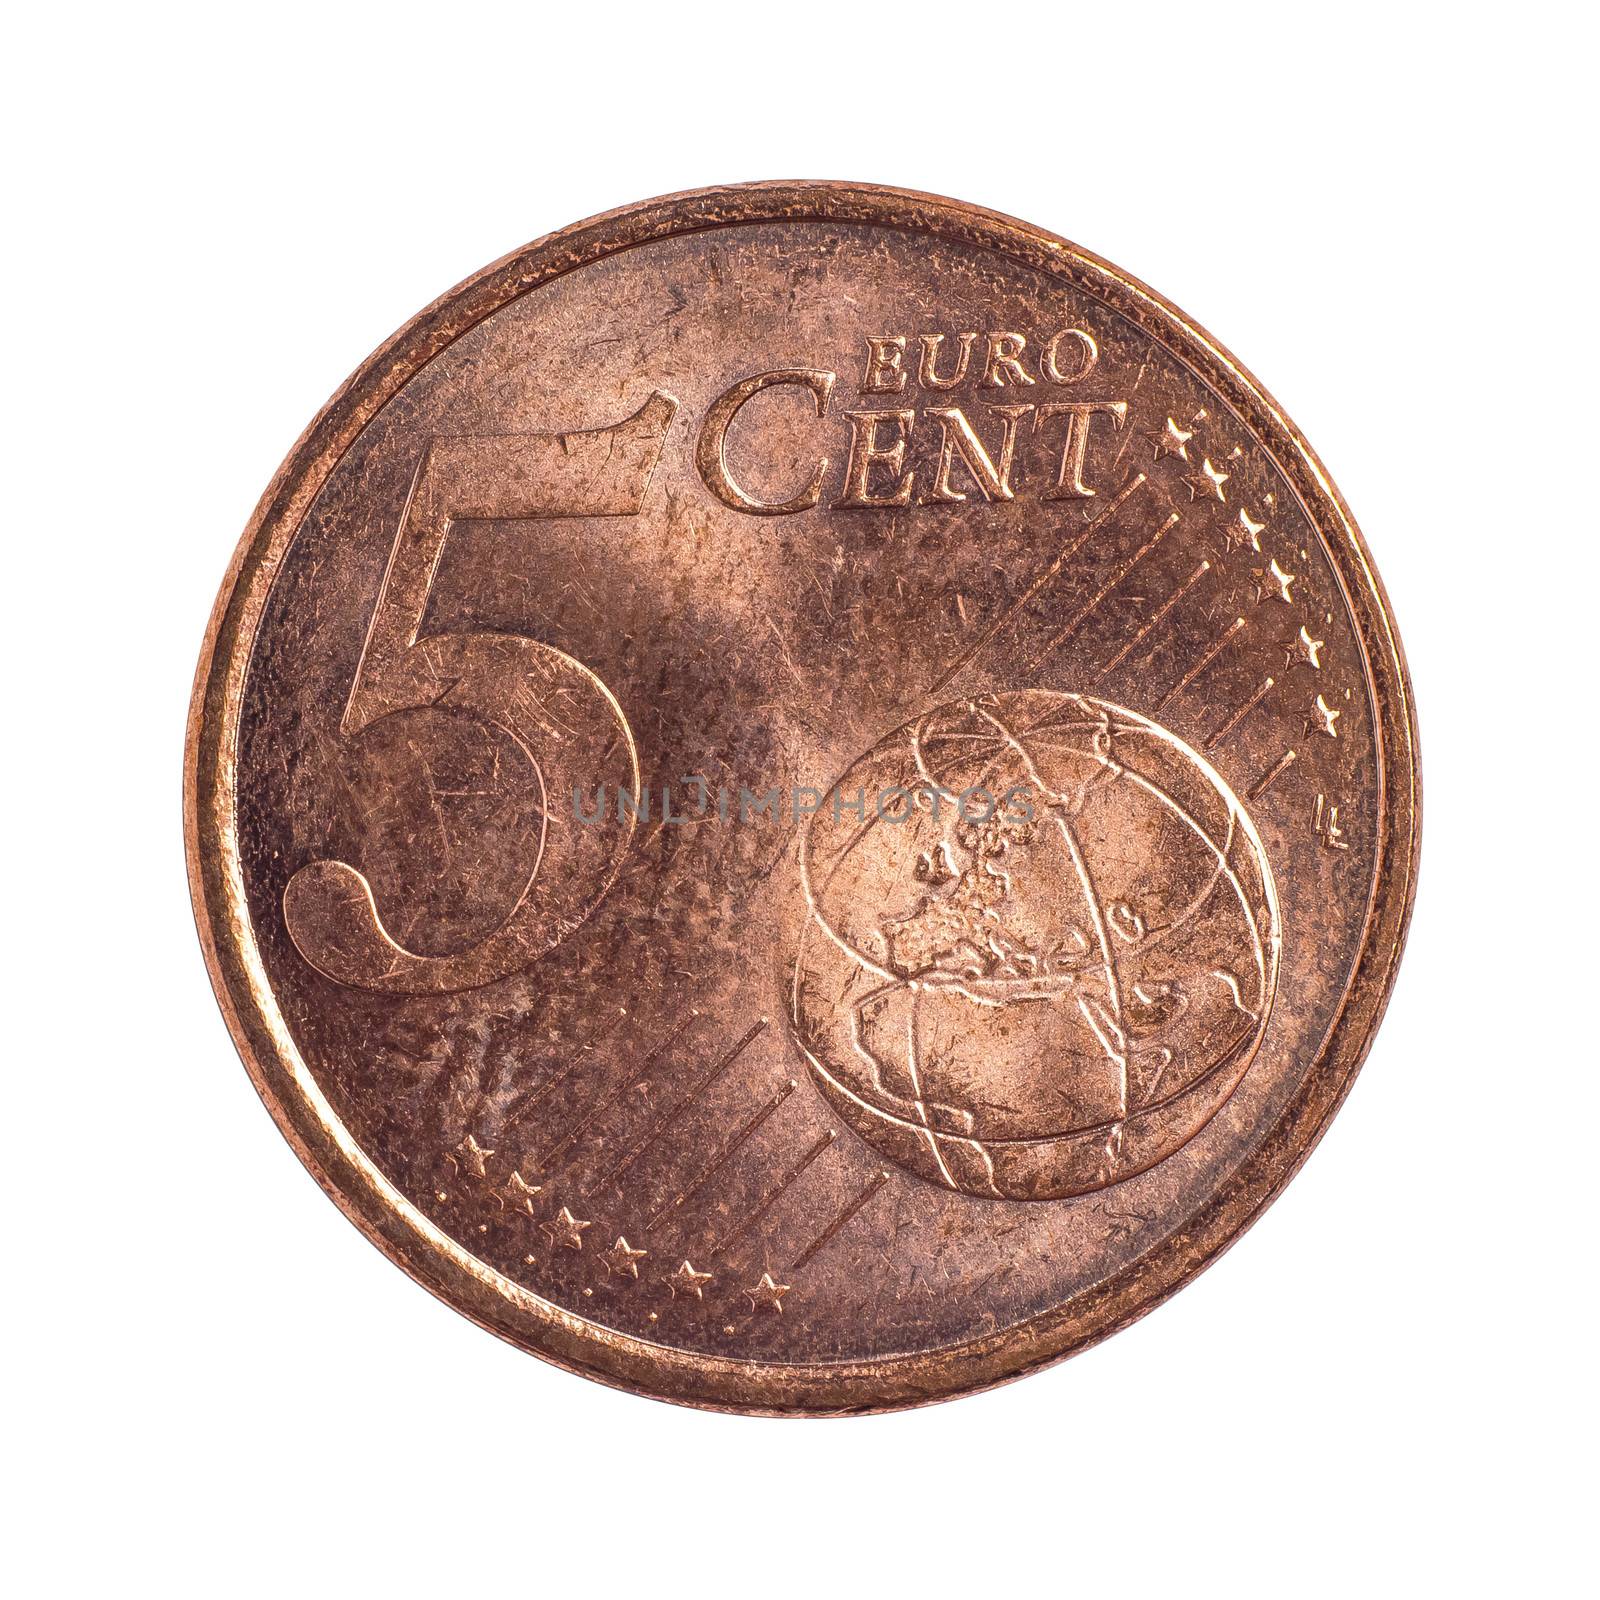 Five euro cents by dynamicfoto